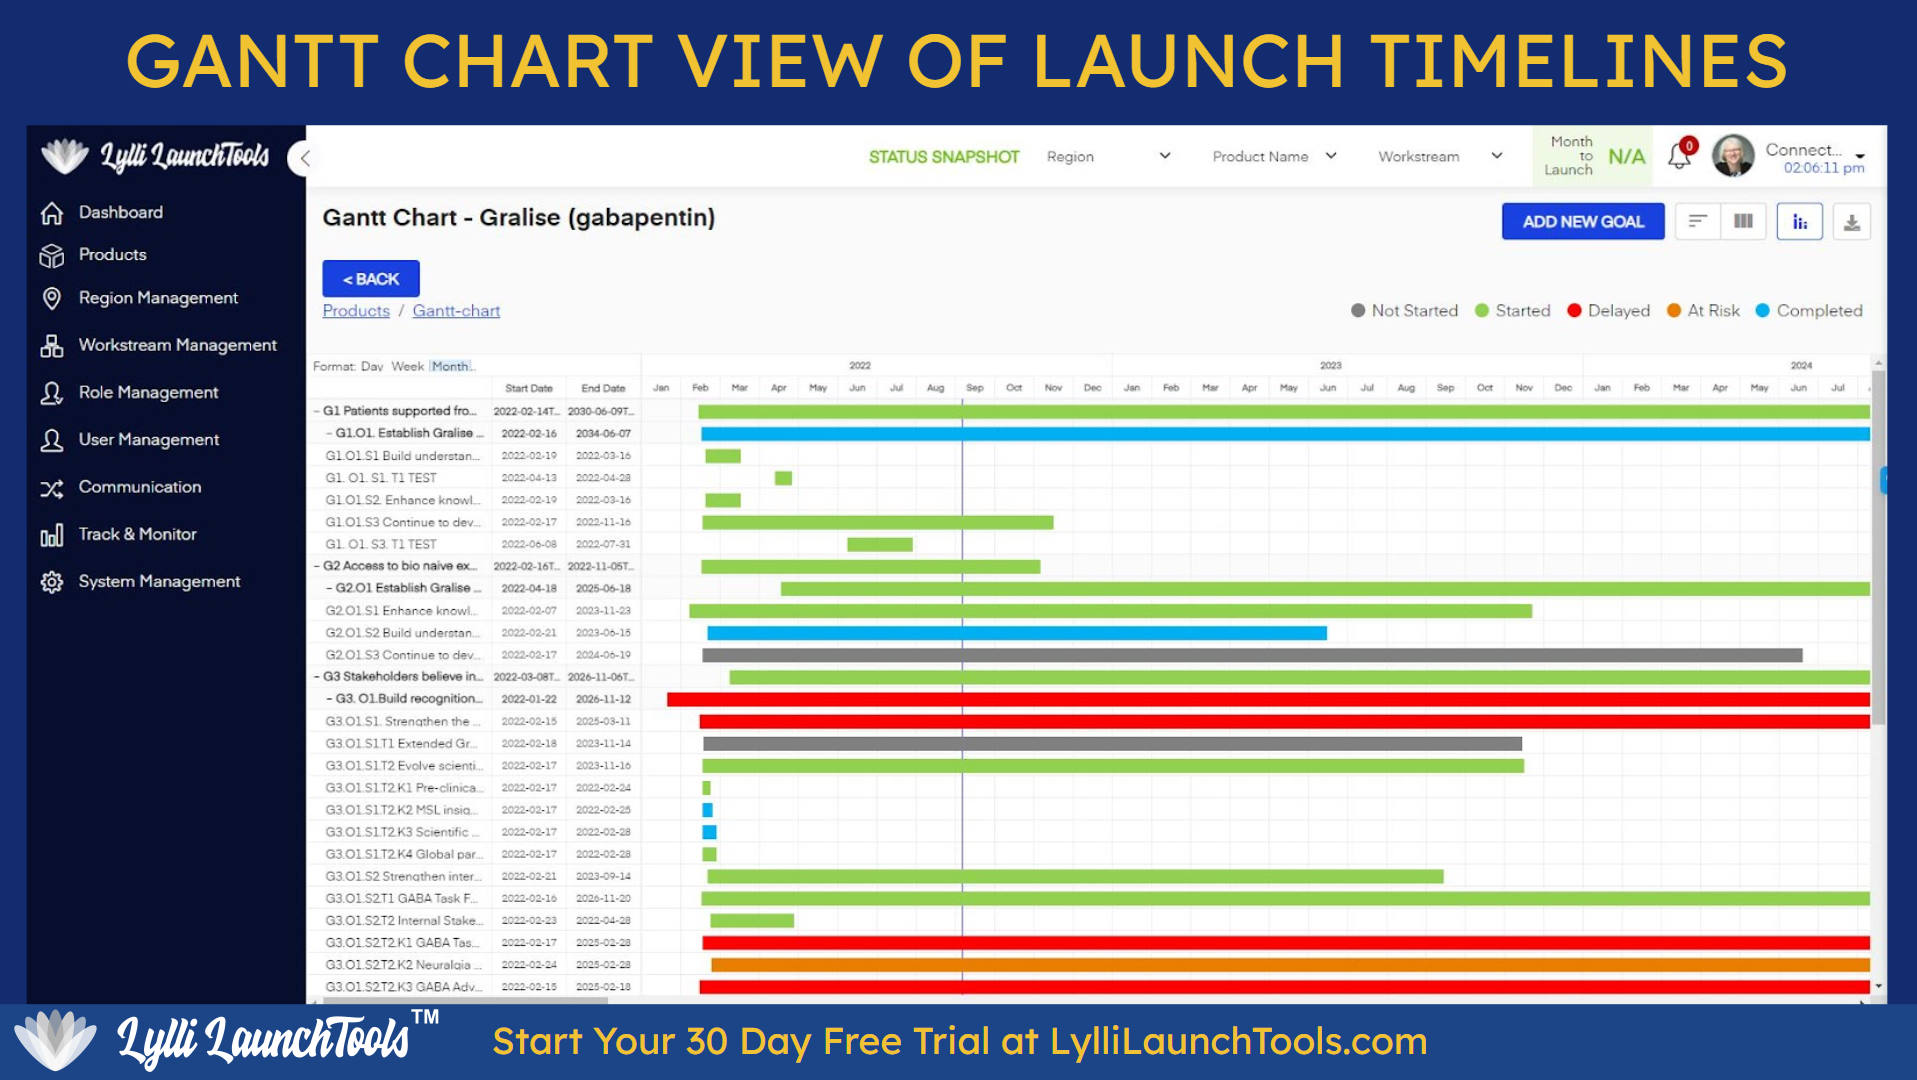 Lylli LaunchTools Interactive Gantt Chart keeps your Product Launch on Track. Your team can now see the Product Launch Timeline in Day view, Week view or Month view. Launch Better, Faster & Smoother. Start for free today at LylliLaunchTools.com/signup